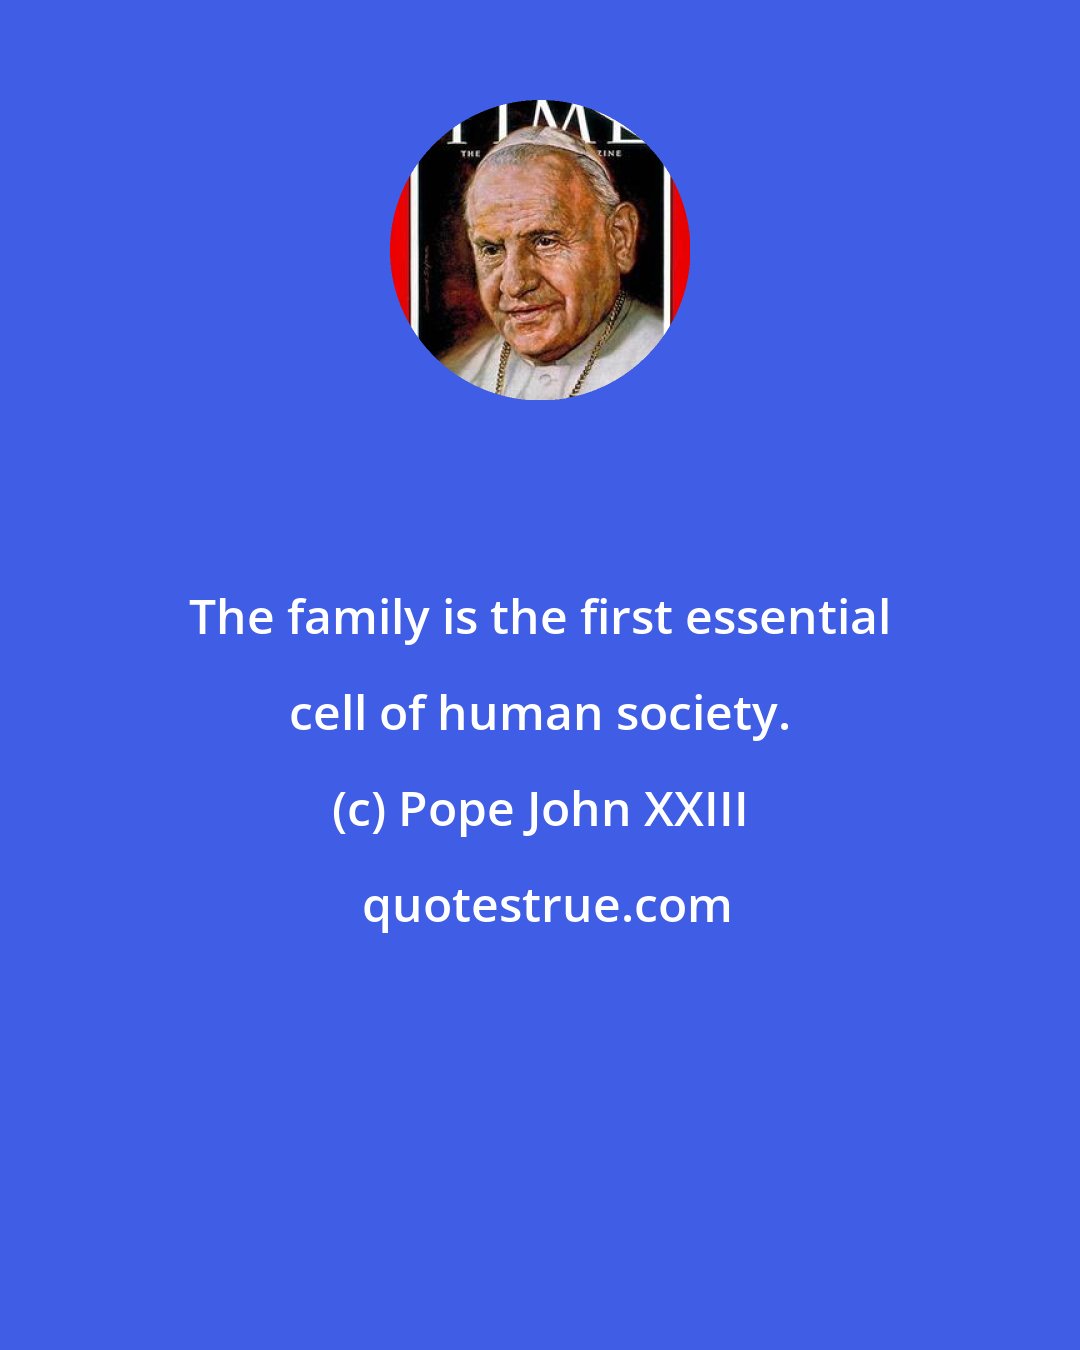 Pope John XXIII: The family is the first essential cell of human society.